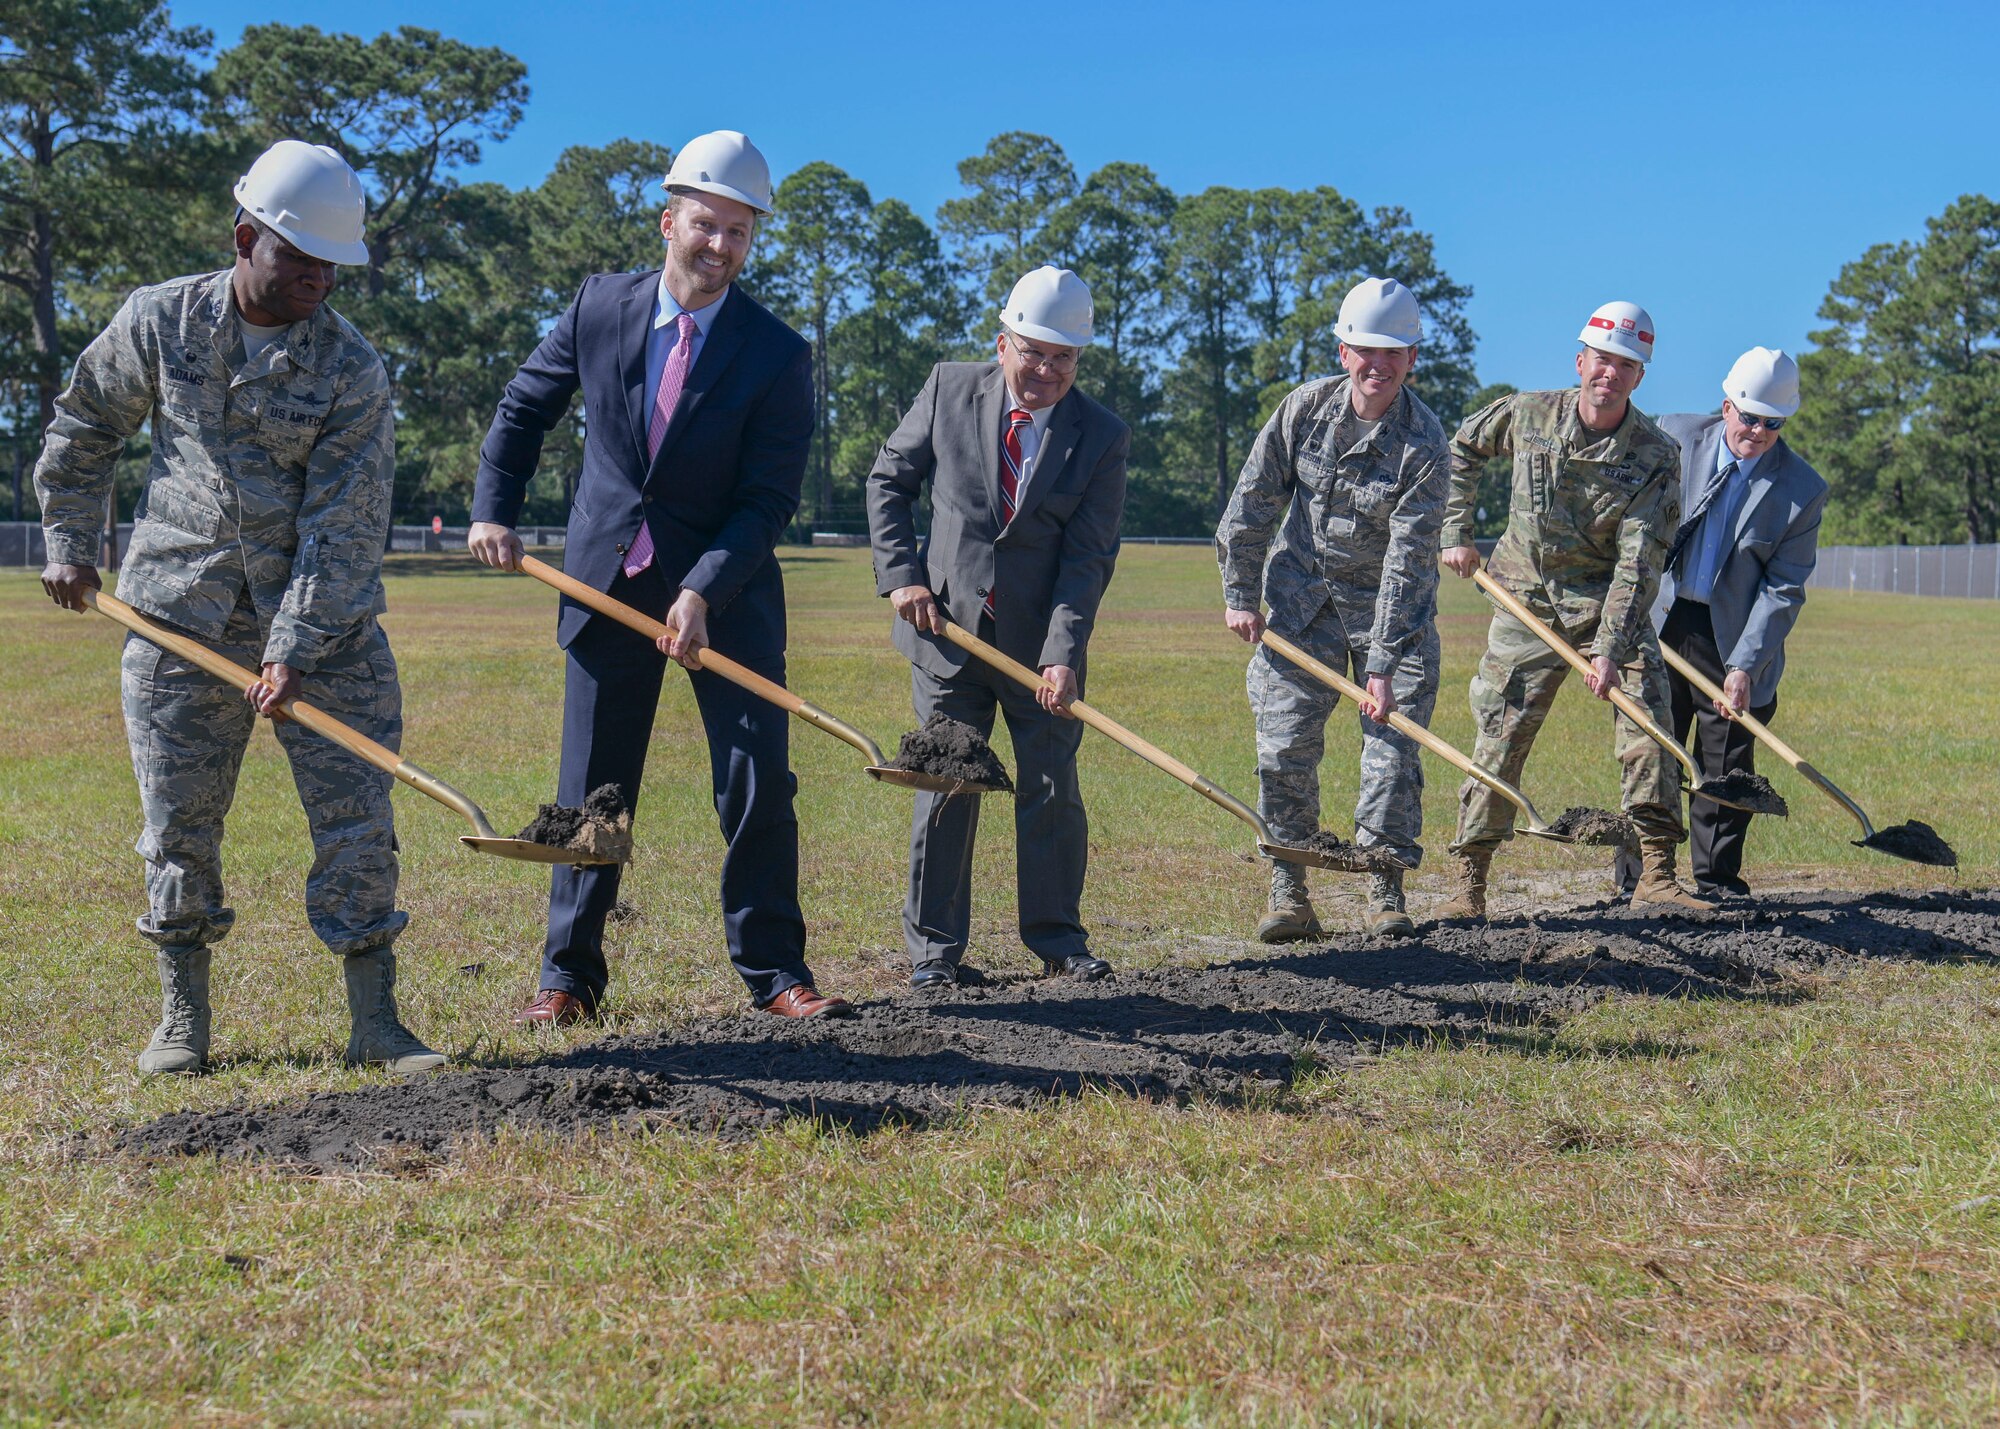 Col. Terrence Adams (left), Joint Base Charleston commander, breaks ground alongside project coordinators for the new Visitor’s Quarters Oct. 24, 2018, on Joint Base Charleston S.C. The project is a result of low vacancy at the current Visitor’s Quarters. The modernized four-story structure will have 266 guest rooms, conference rooms, an exercise room, guest laundry and other amenities covering 150,000 square-feet. The Visitor’s Quarters project is slated for completion in fall 2020.